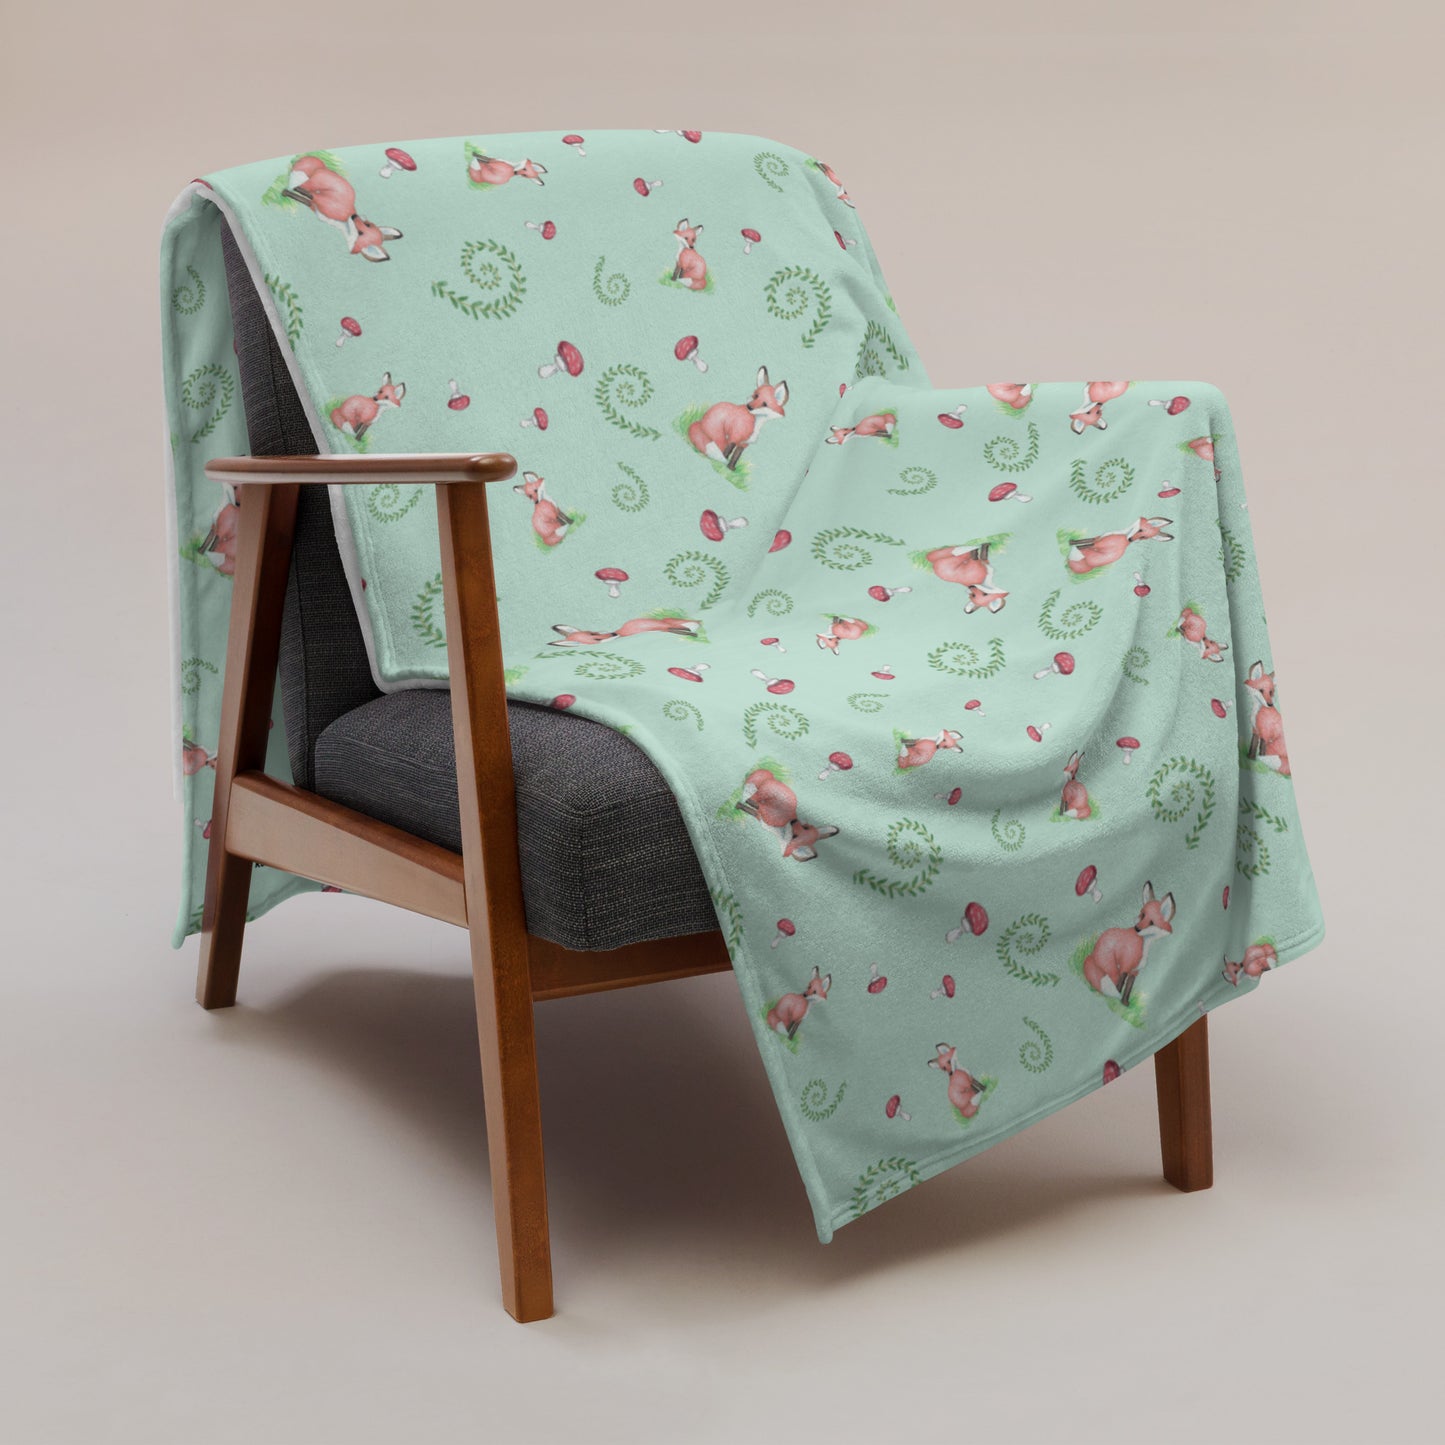 60 by 80 inch watercolor forest fox patterned blanket. Made of soft and fluffy polyester. Has foxes, mushrooms, and ferns on light green background. White underside. Machine-washable, hypoallergenic, and flame retardant. Shown on sofa.